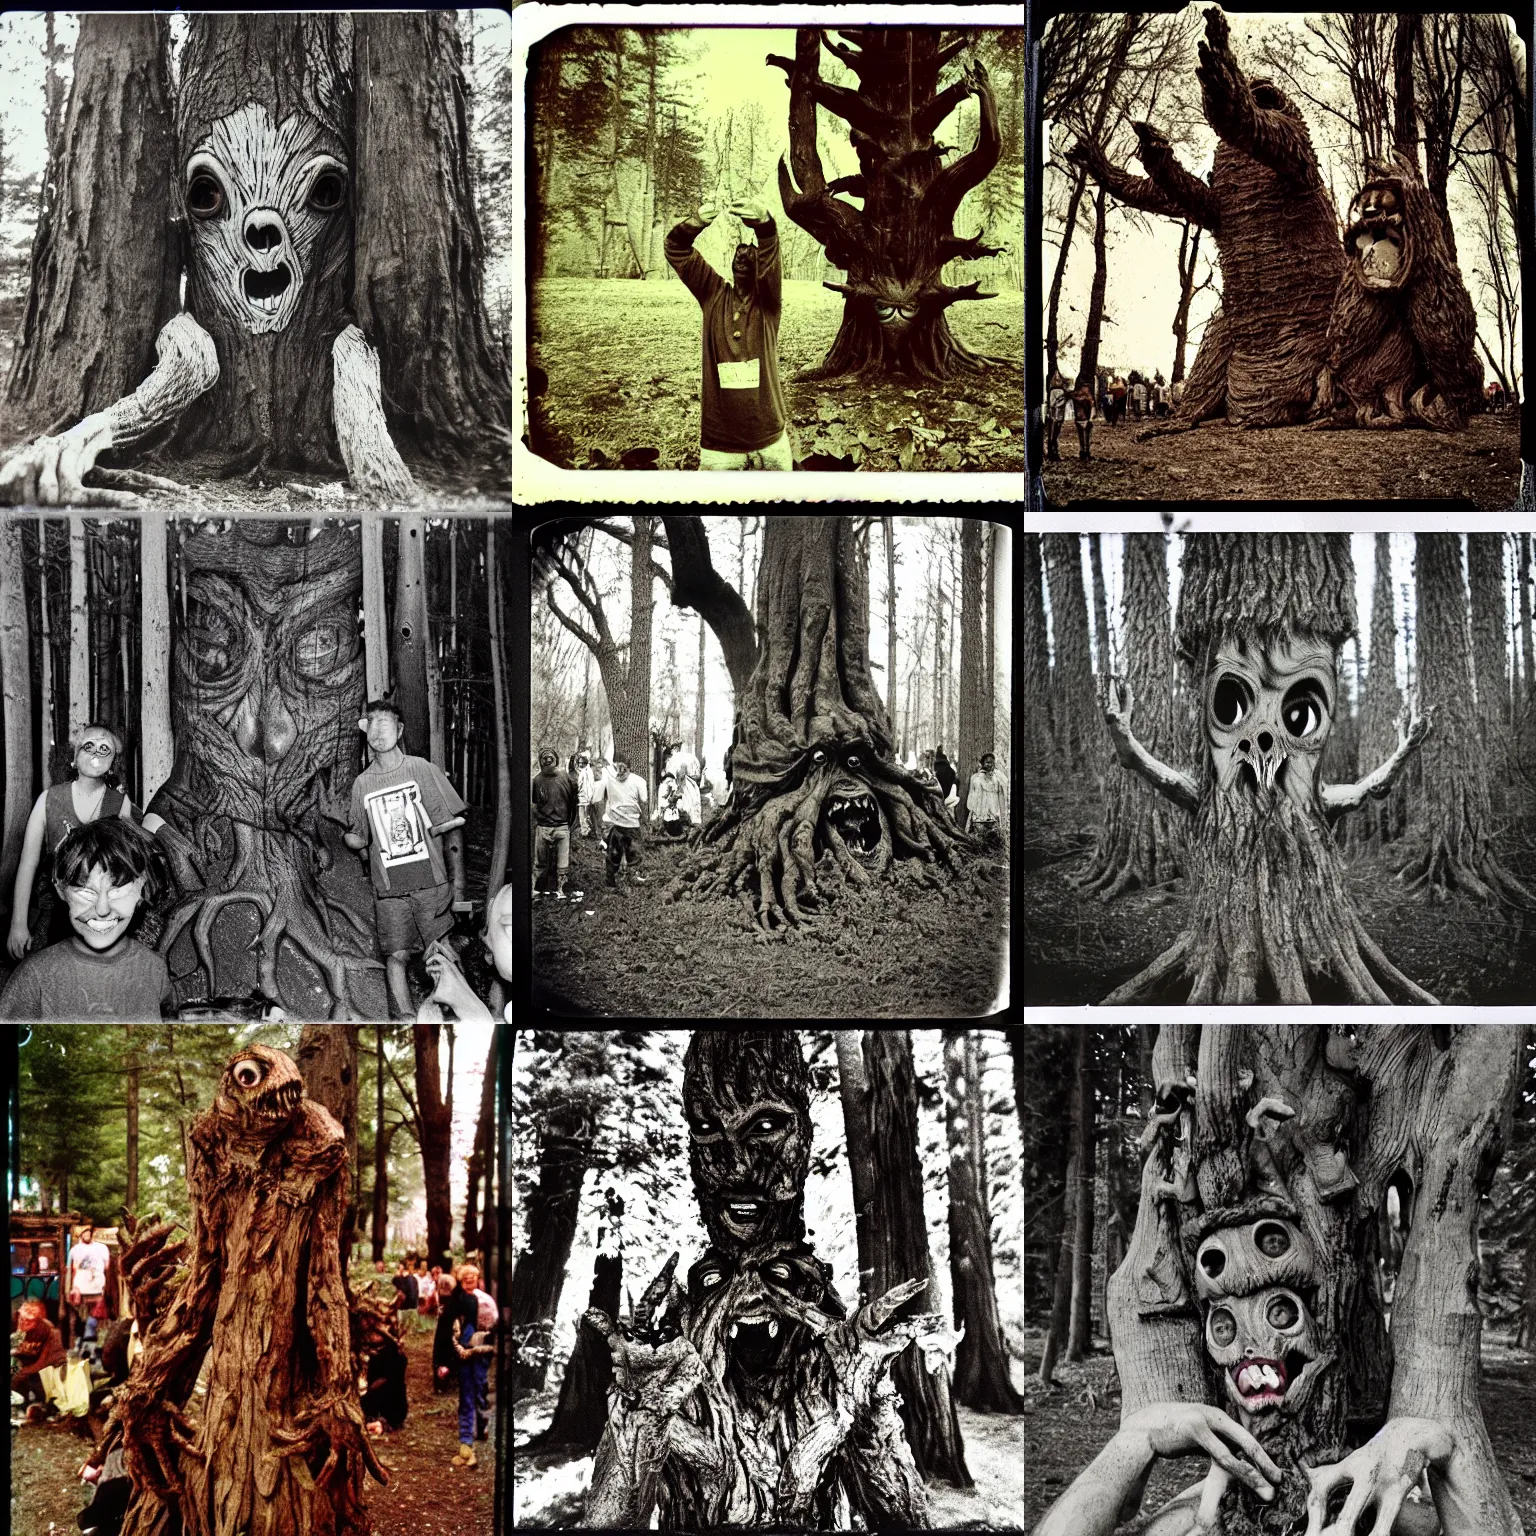 Prompt: a terrifying tree monster with distorted faces made of bark at the mushroom - eating contest, critical moment, lovecratftian horror, pans labyrinth, shot on expired instamatic film